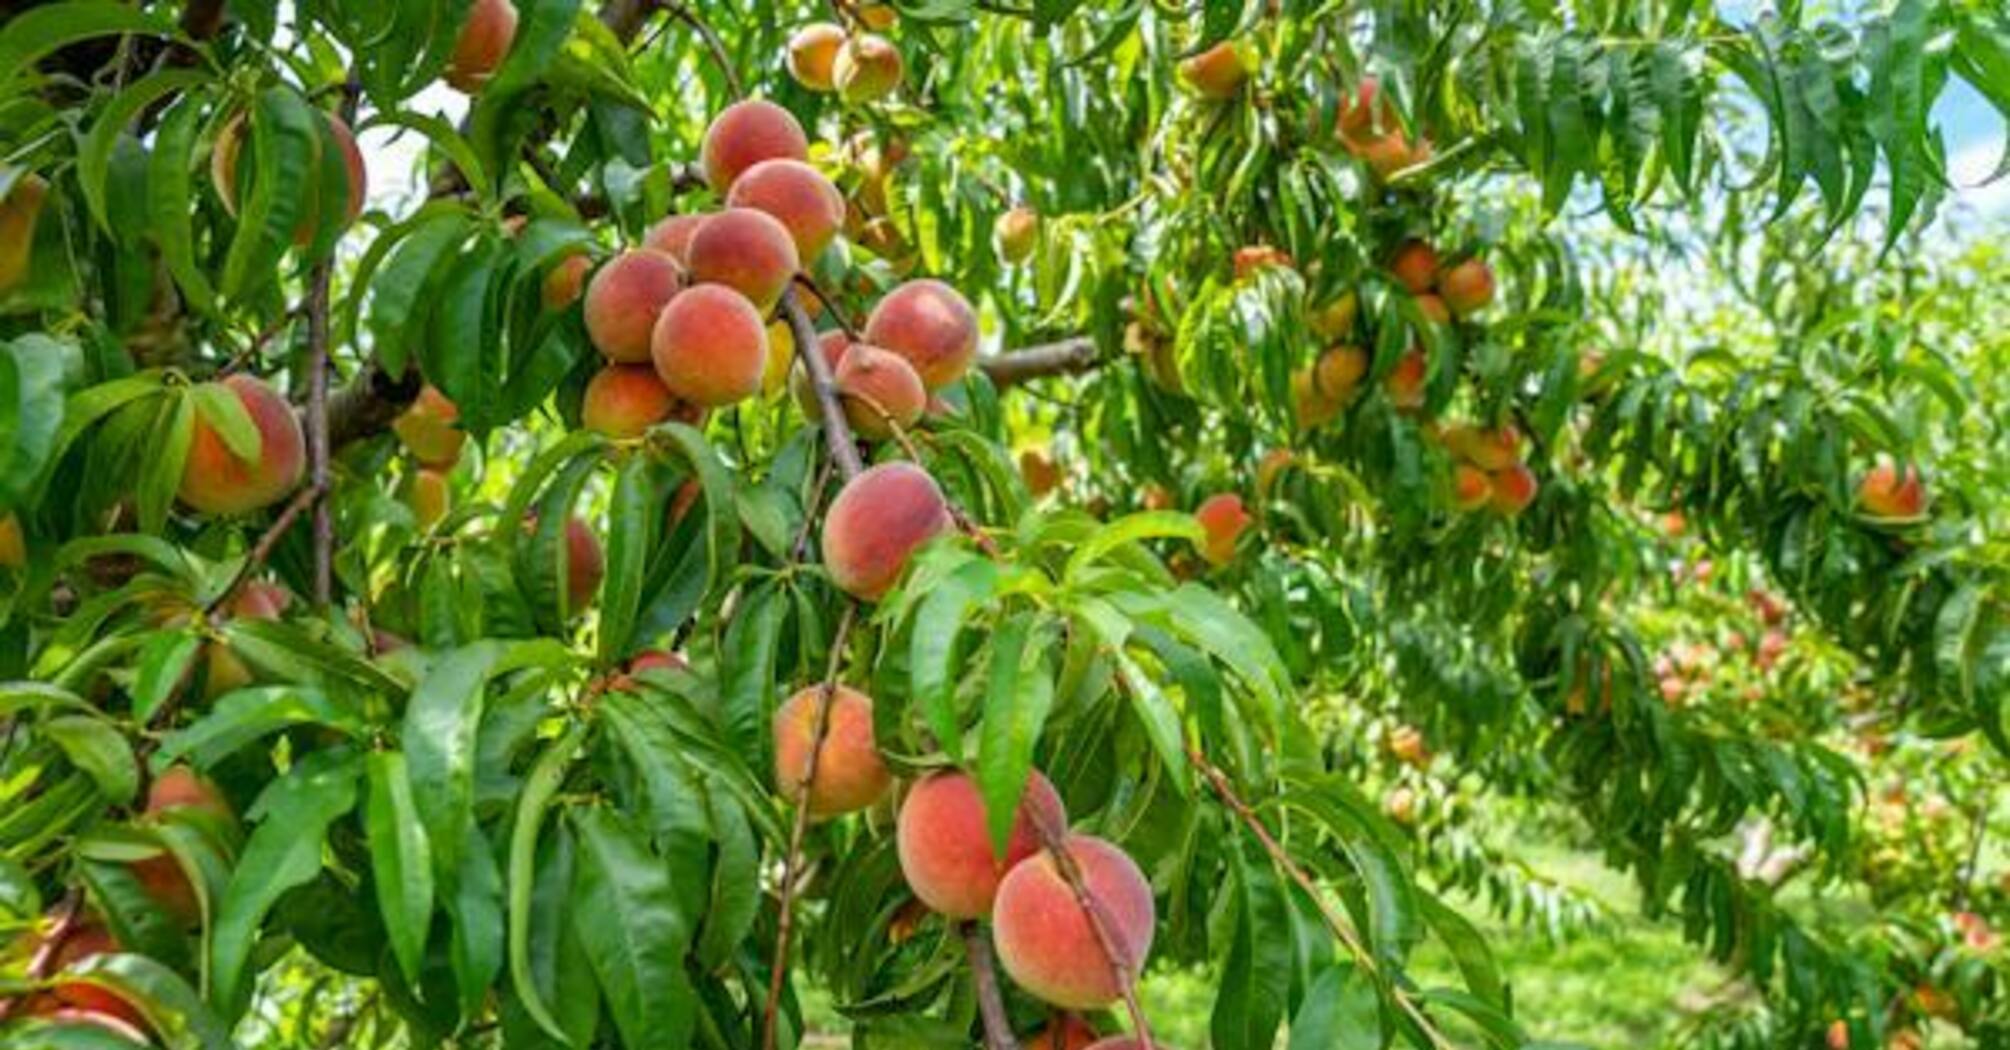 Pros and cons of growing peaches from seed